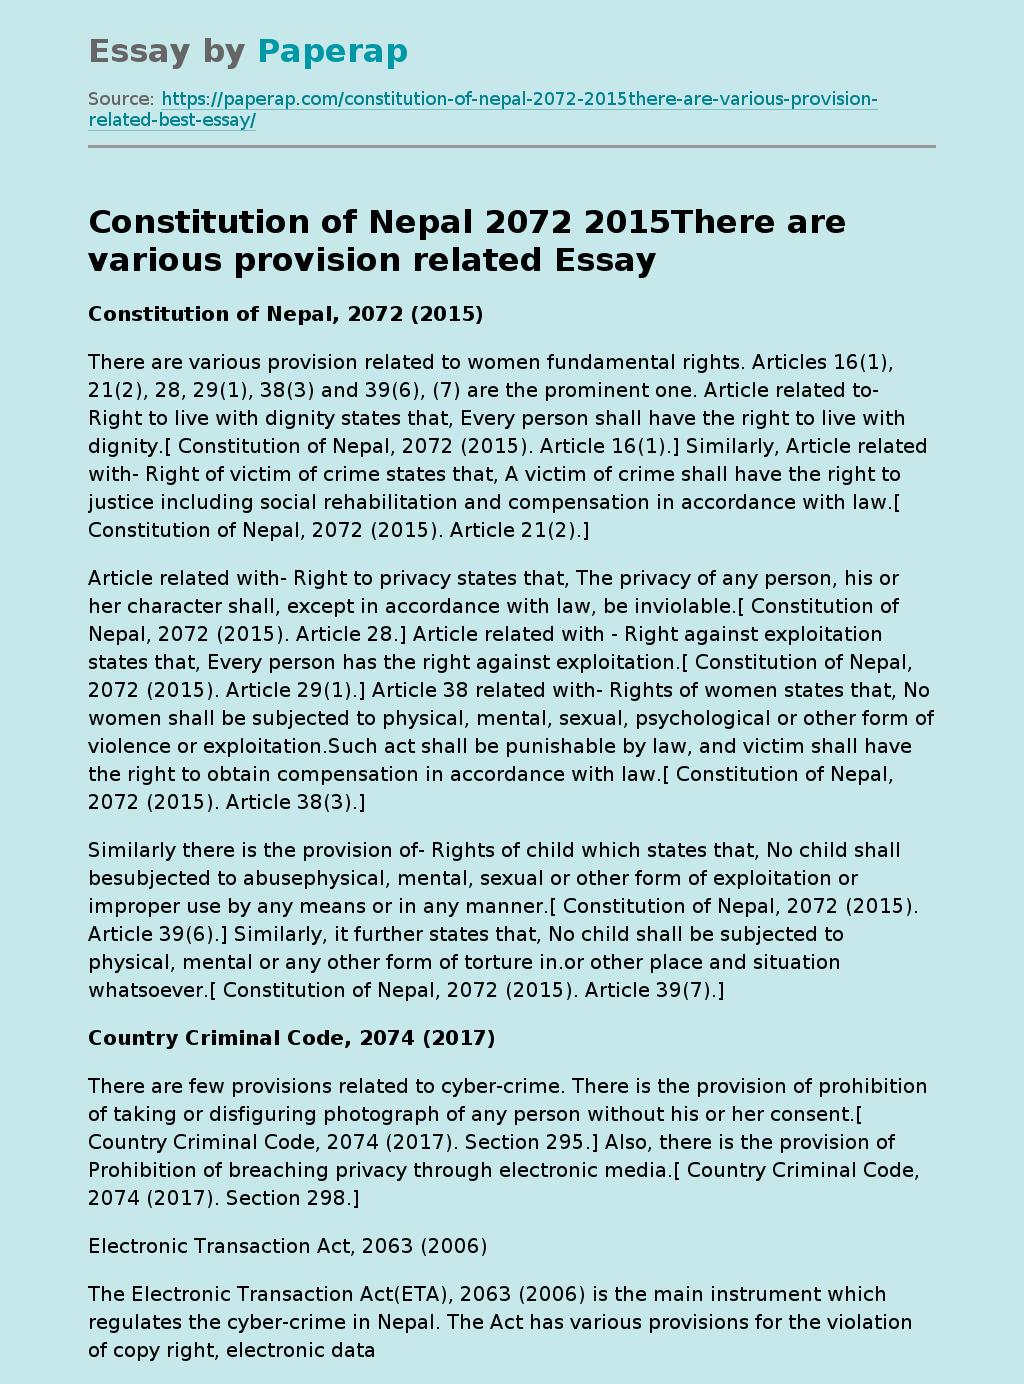 Constitution of Nepal 2072 2015There are various provision related